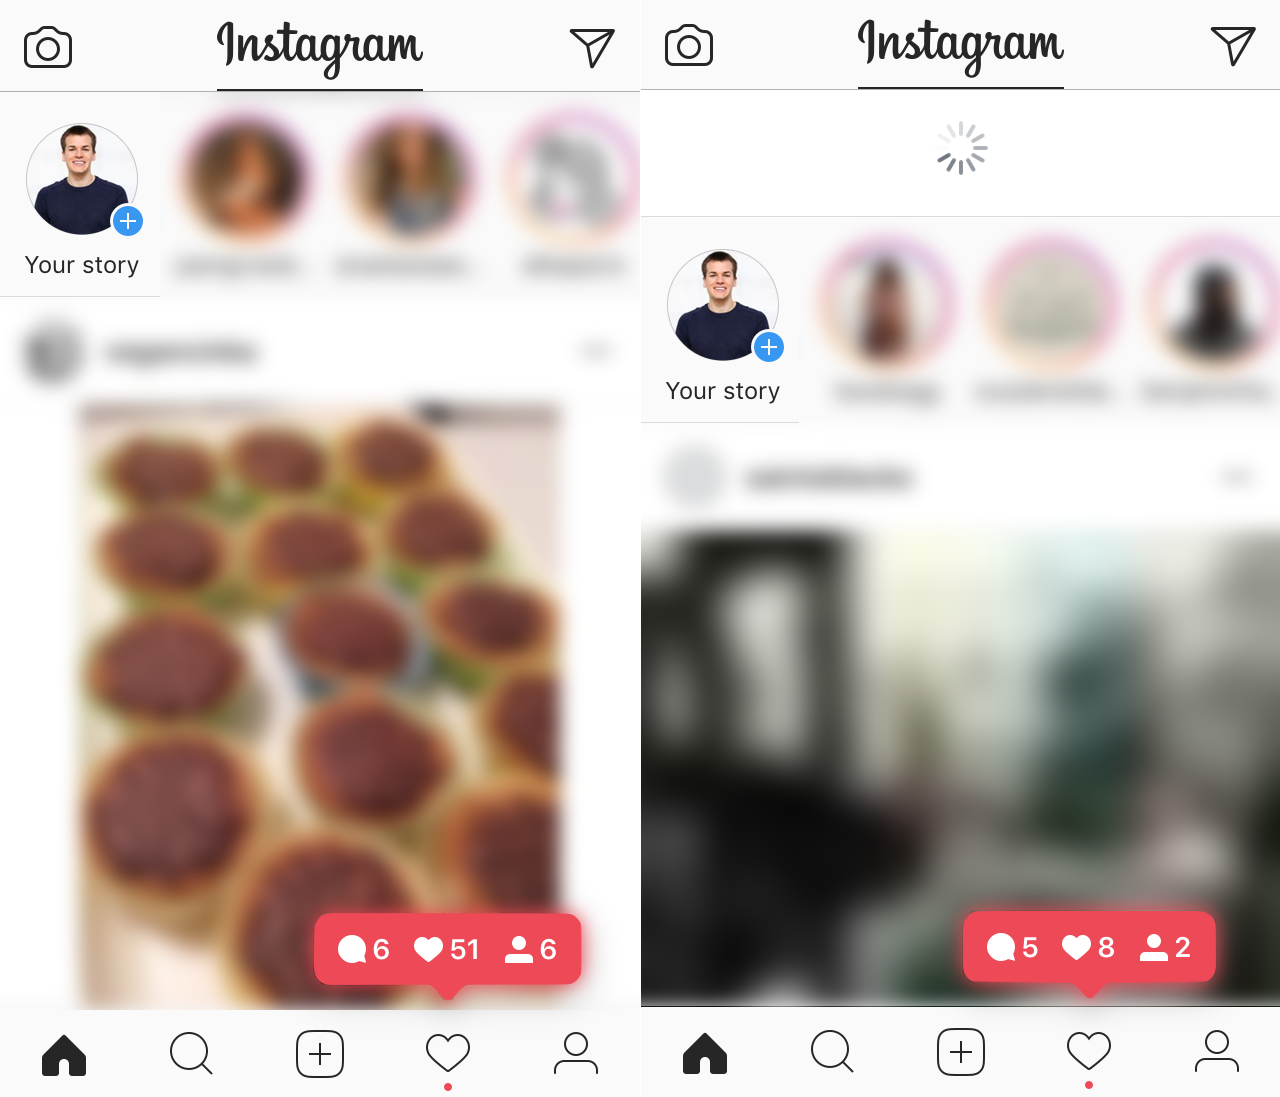 left 10min after script run right 25min before script run - how to recover lost instagram follow request